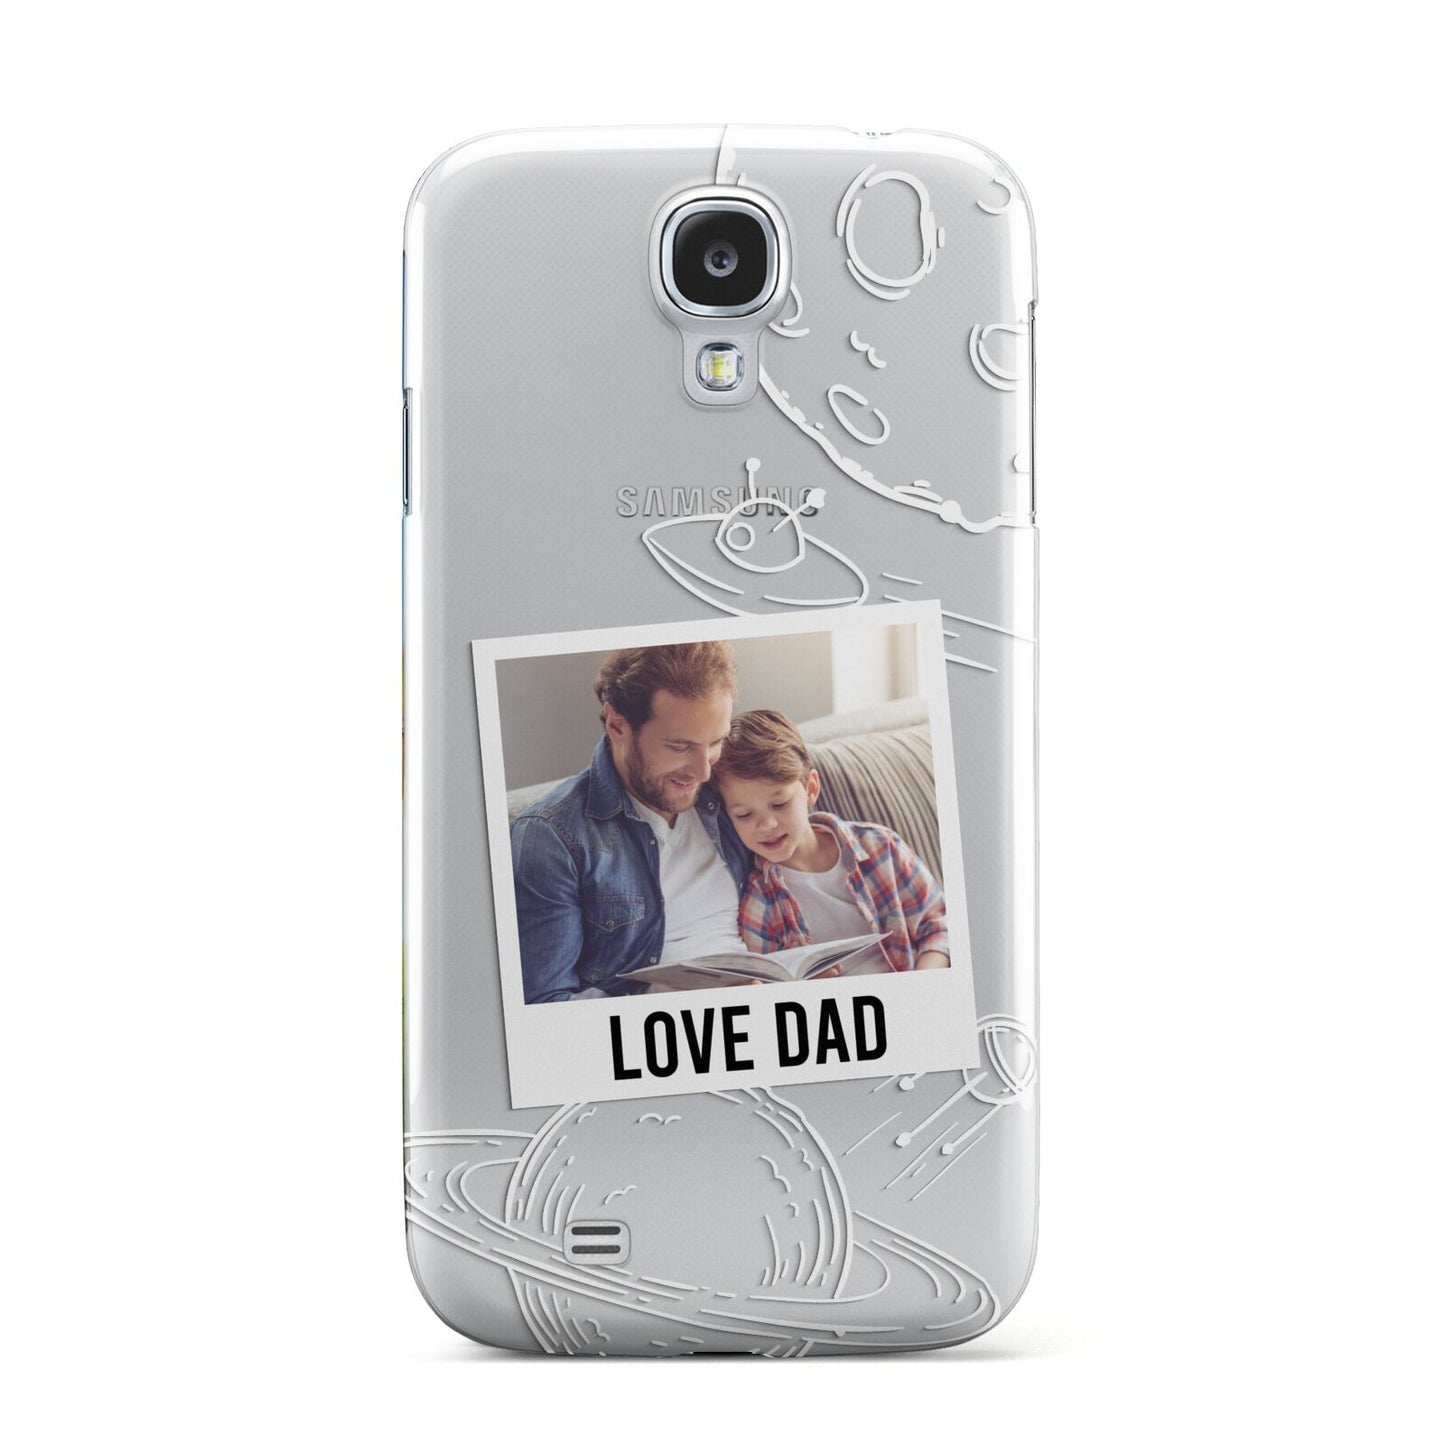 Personalised From Dad Photo Samsung Galaxy S4 Case